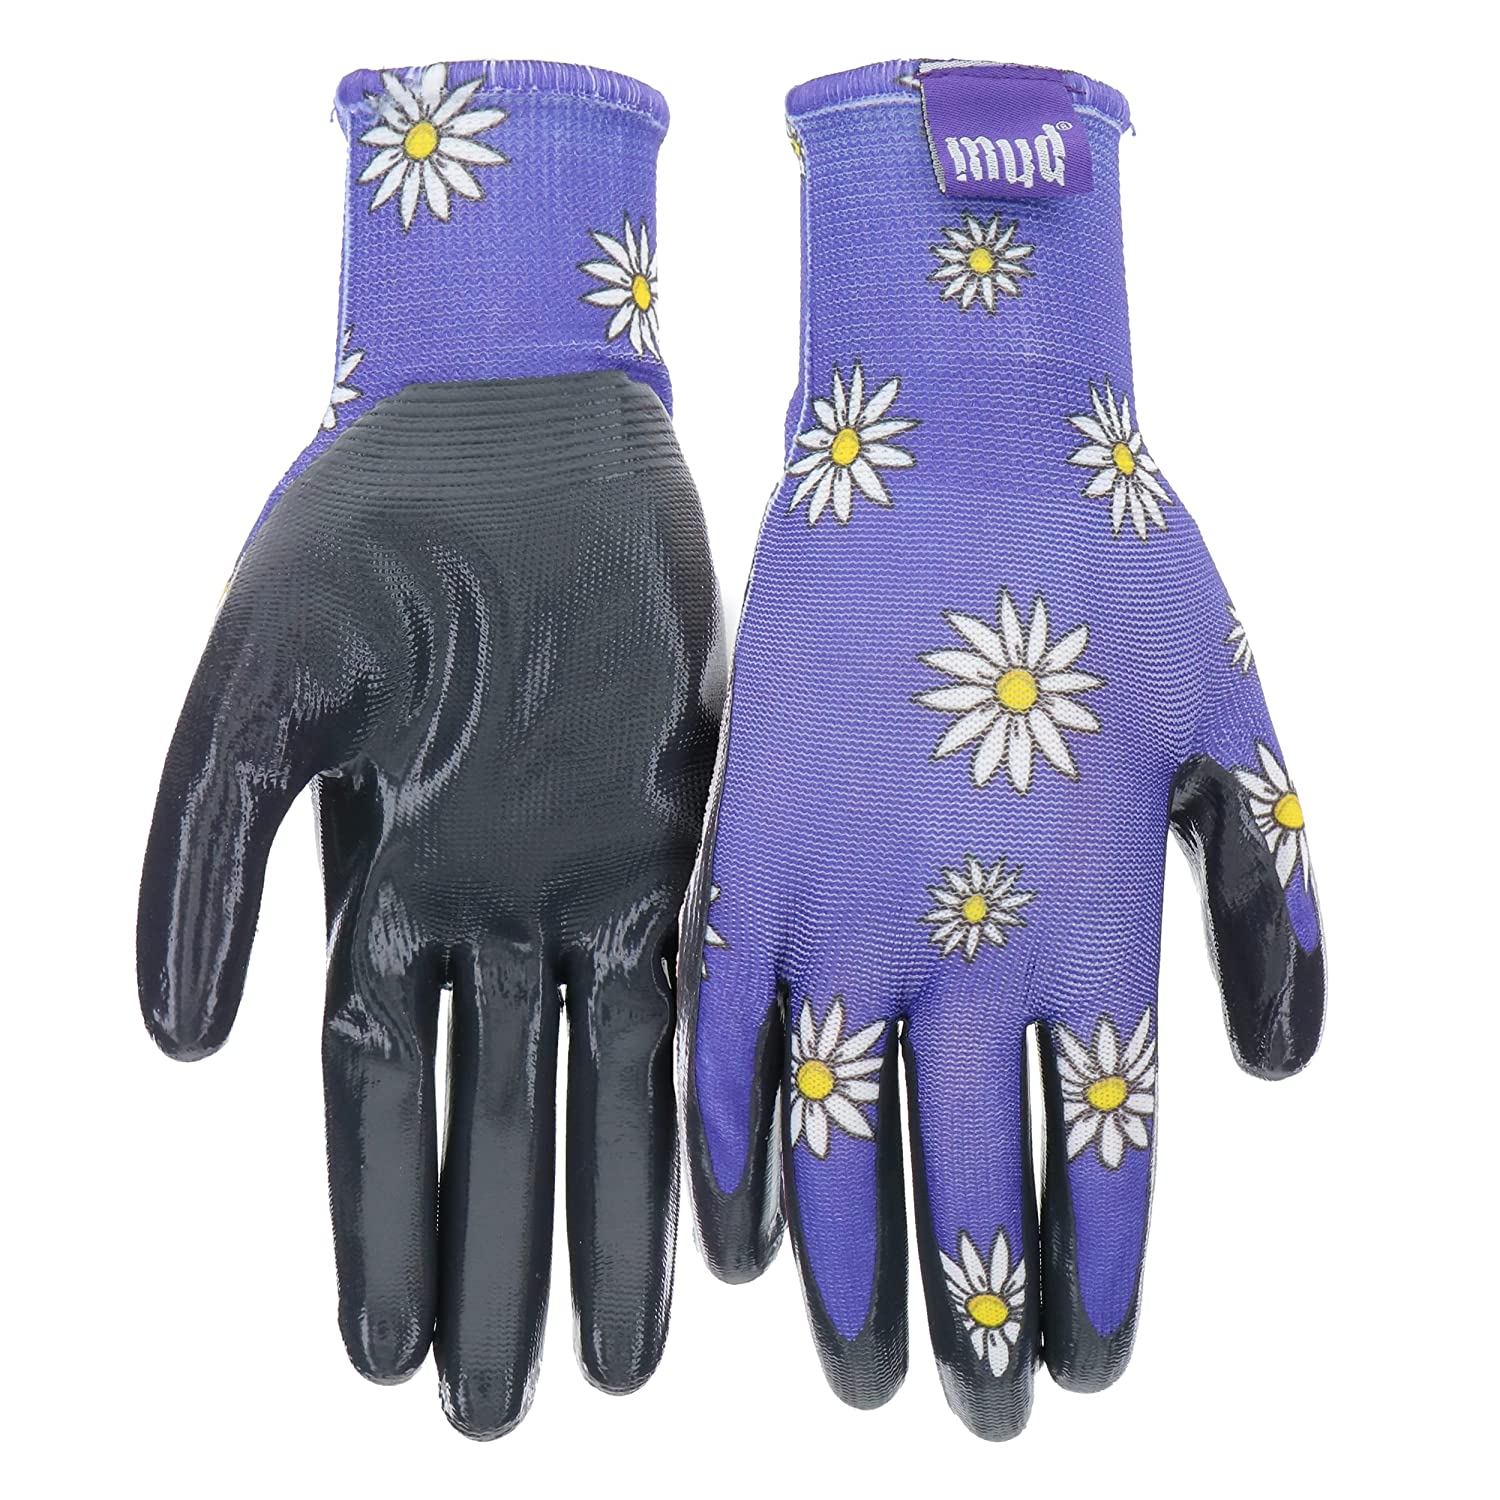 West Chester MD31001V-Y Garden Gloves, Daisy Printed Glove, Youth Size, Nitrile Palm, Polyester Knit, Violet, Seamless Knit Cuff, Nitrile Coating, Resists: Water